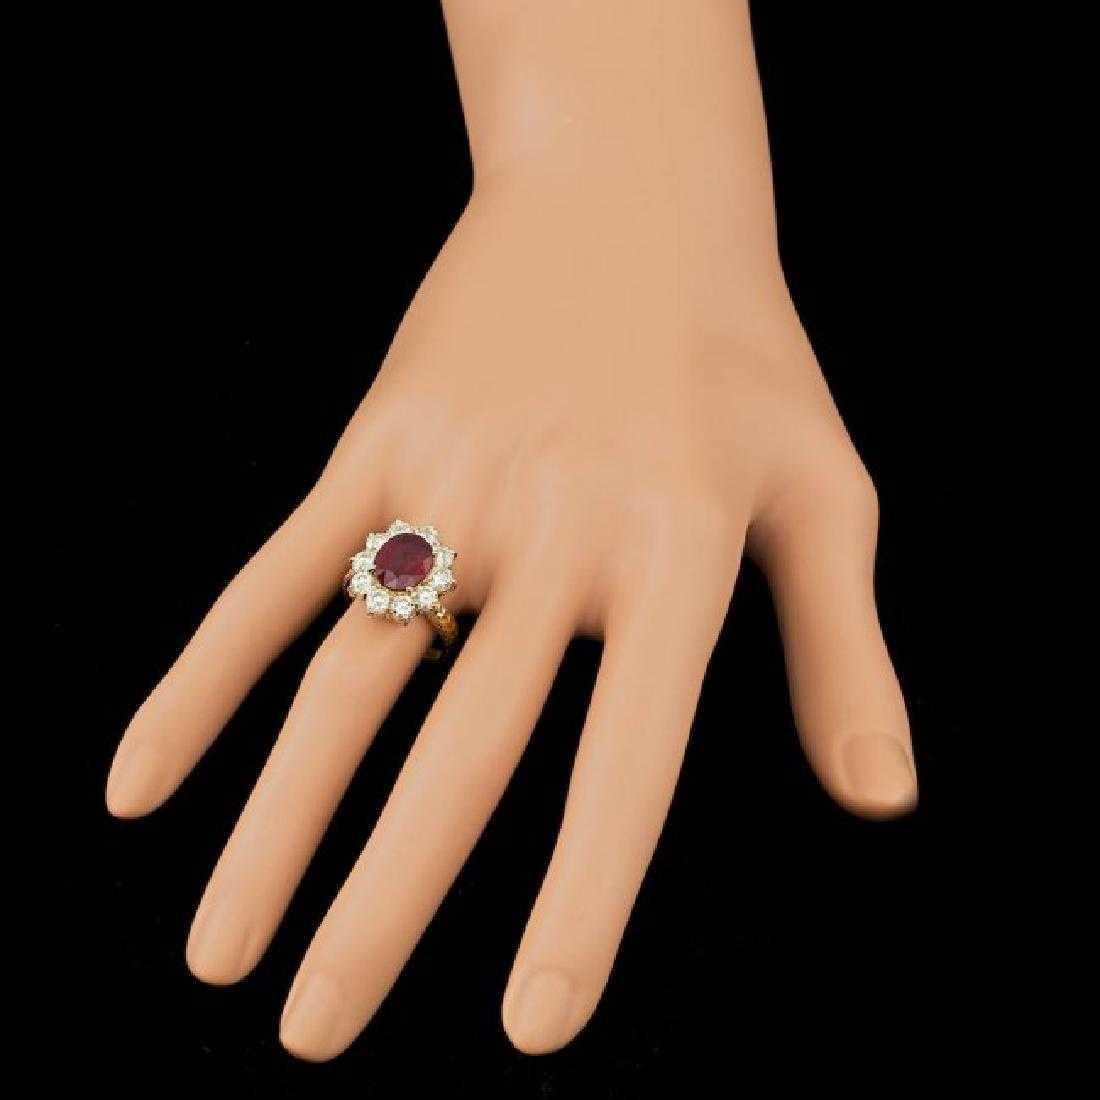 14K Yellow Gold 2.69ct Ruby and 2.08ct Diamond Ring